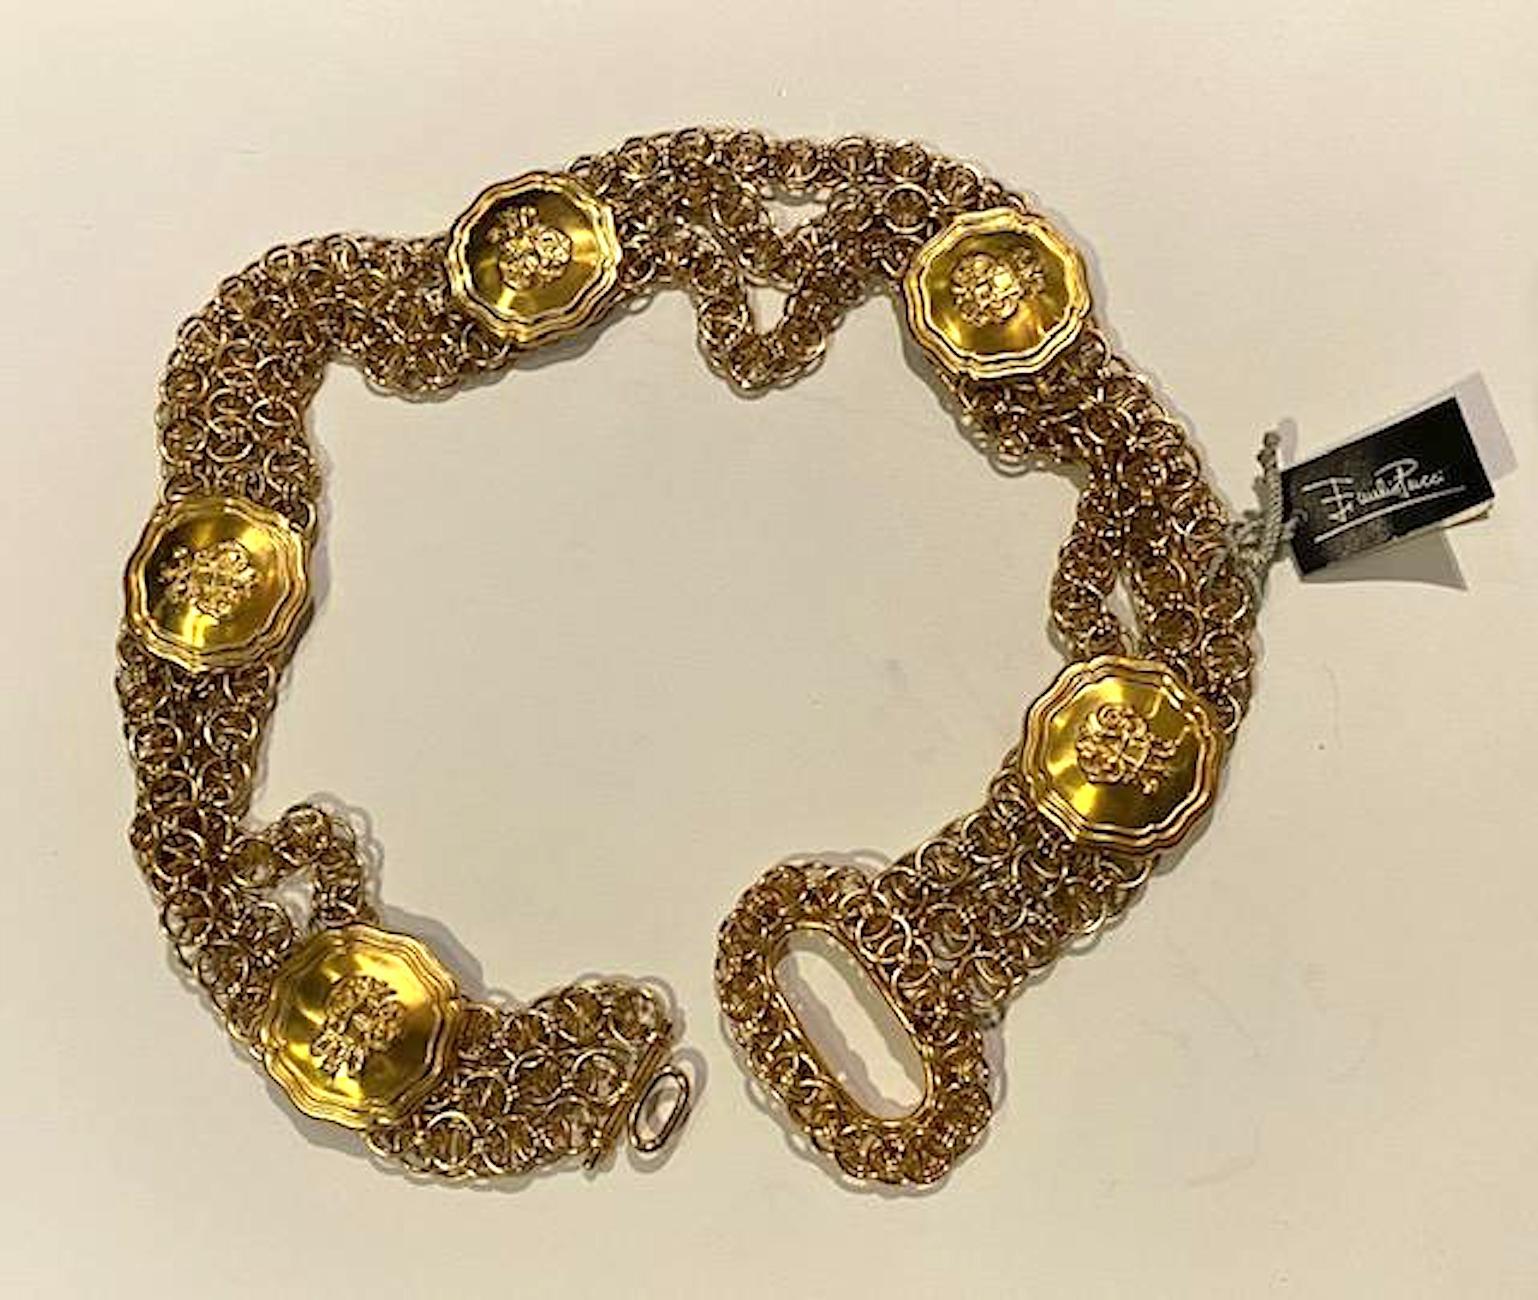 A 1980s triple strand wide chain belt with five medallions by iconic fashion house Emilio Pucci. Each of the three strands and the buckle are double thick links in shiny gold tone. The five medallions are satin gold tone for contrast and measure